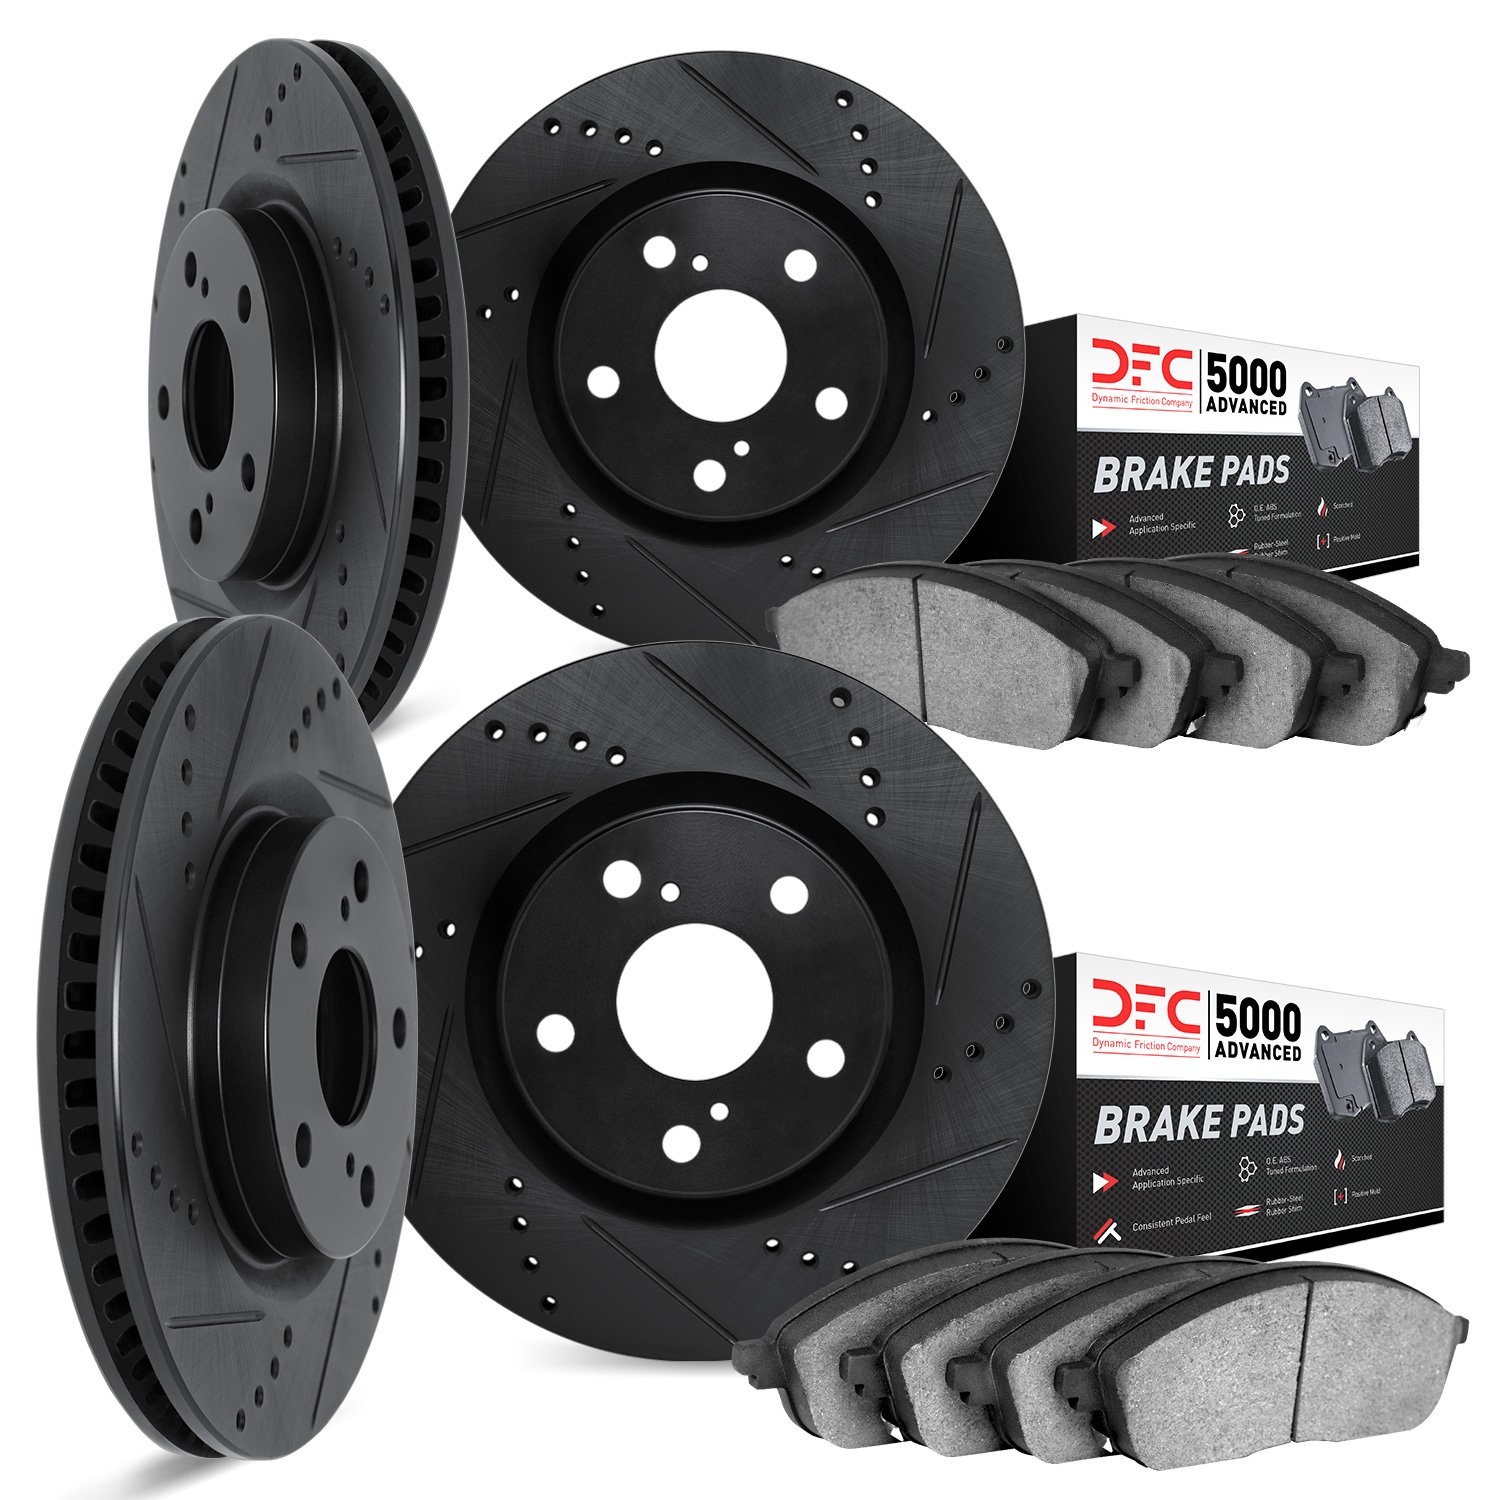 8504-31072 Drilled/Slotted Brake Rotors w/5000 Advanced Brake Pads Kit [Black], 2011-2014 BMW, Position: Front and Rear